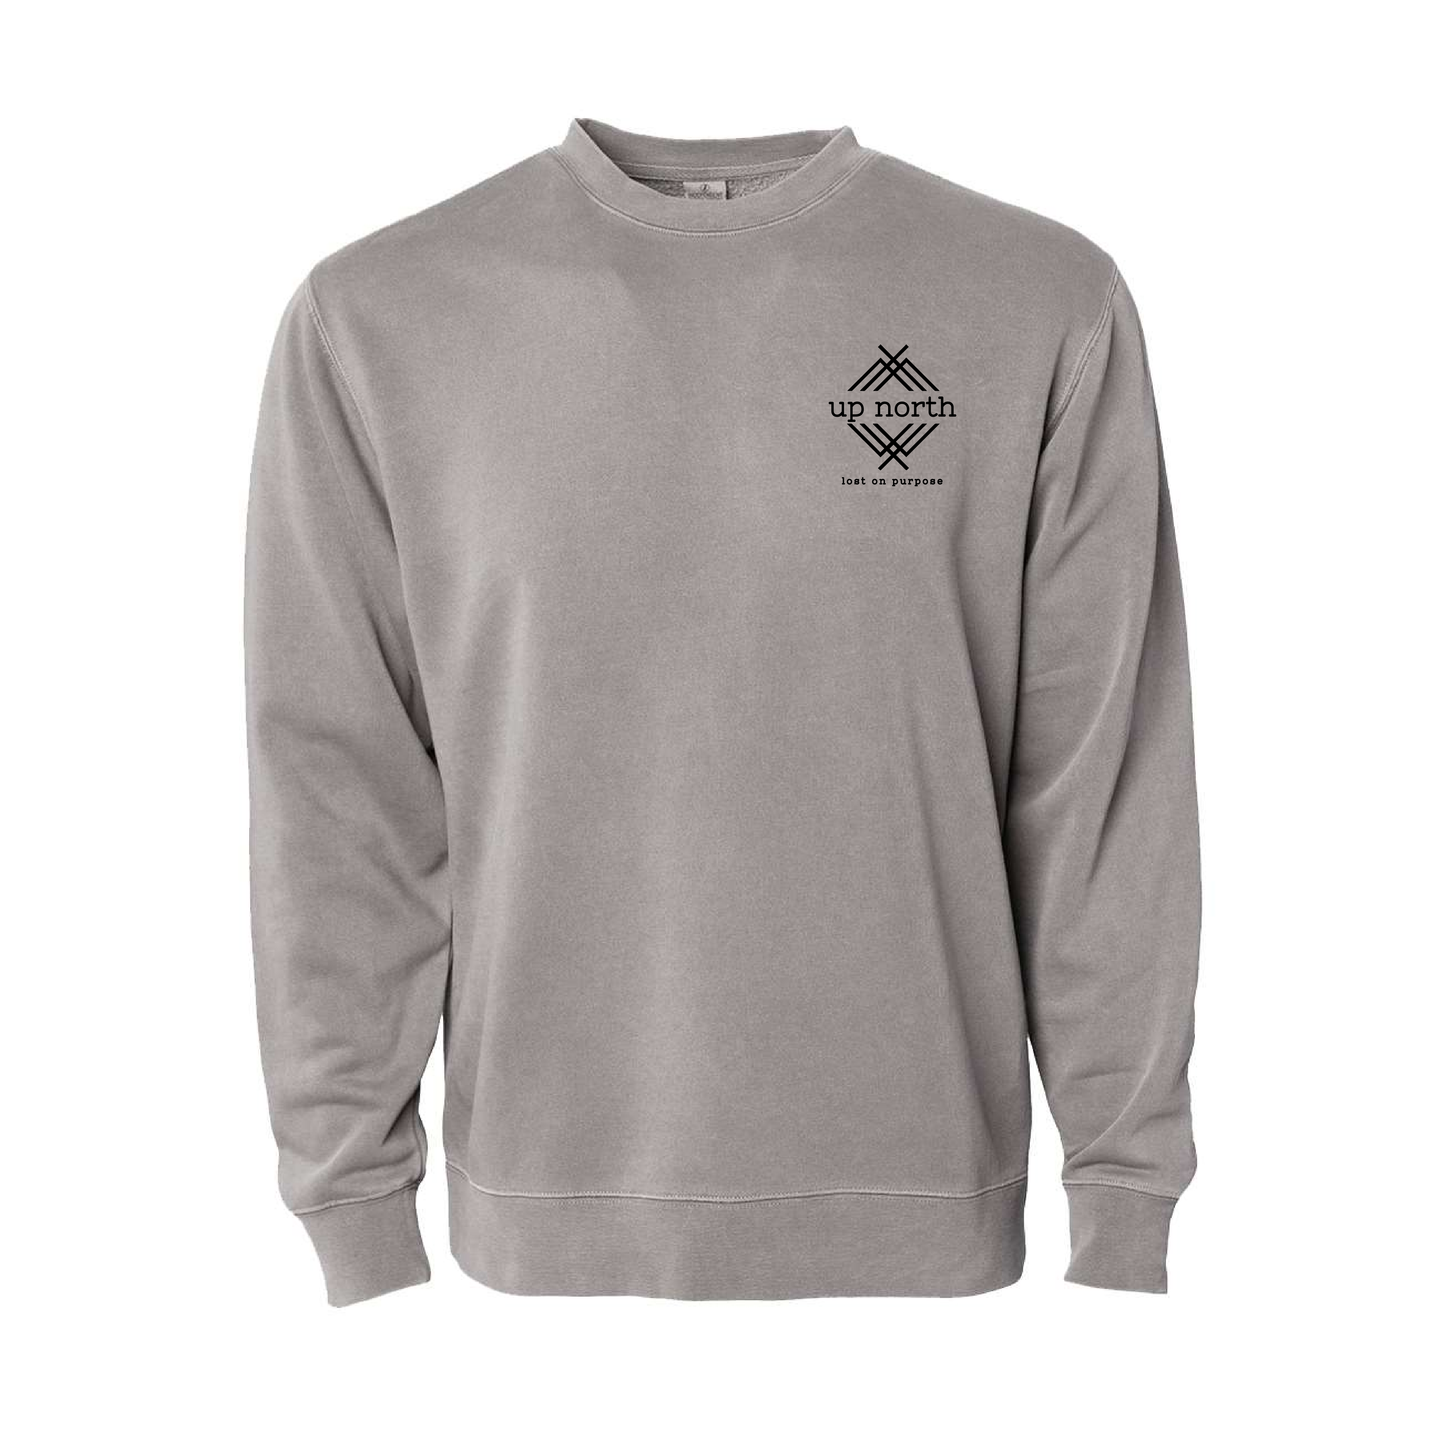 Lost on Purpose - Pigment Dyed Crew - Washed Grey